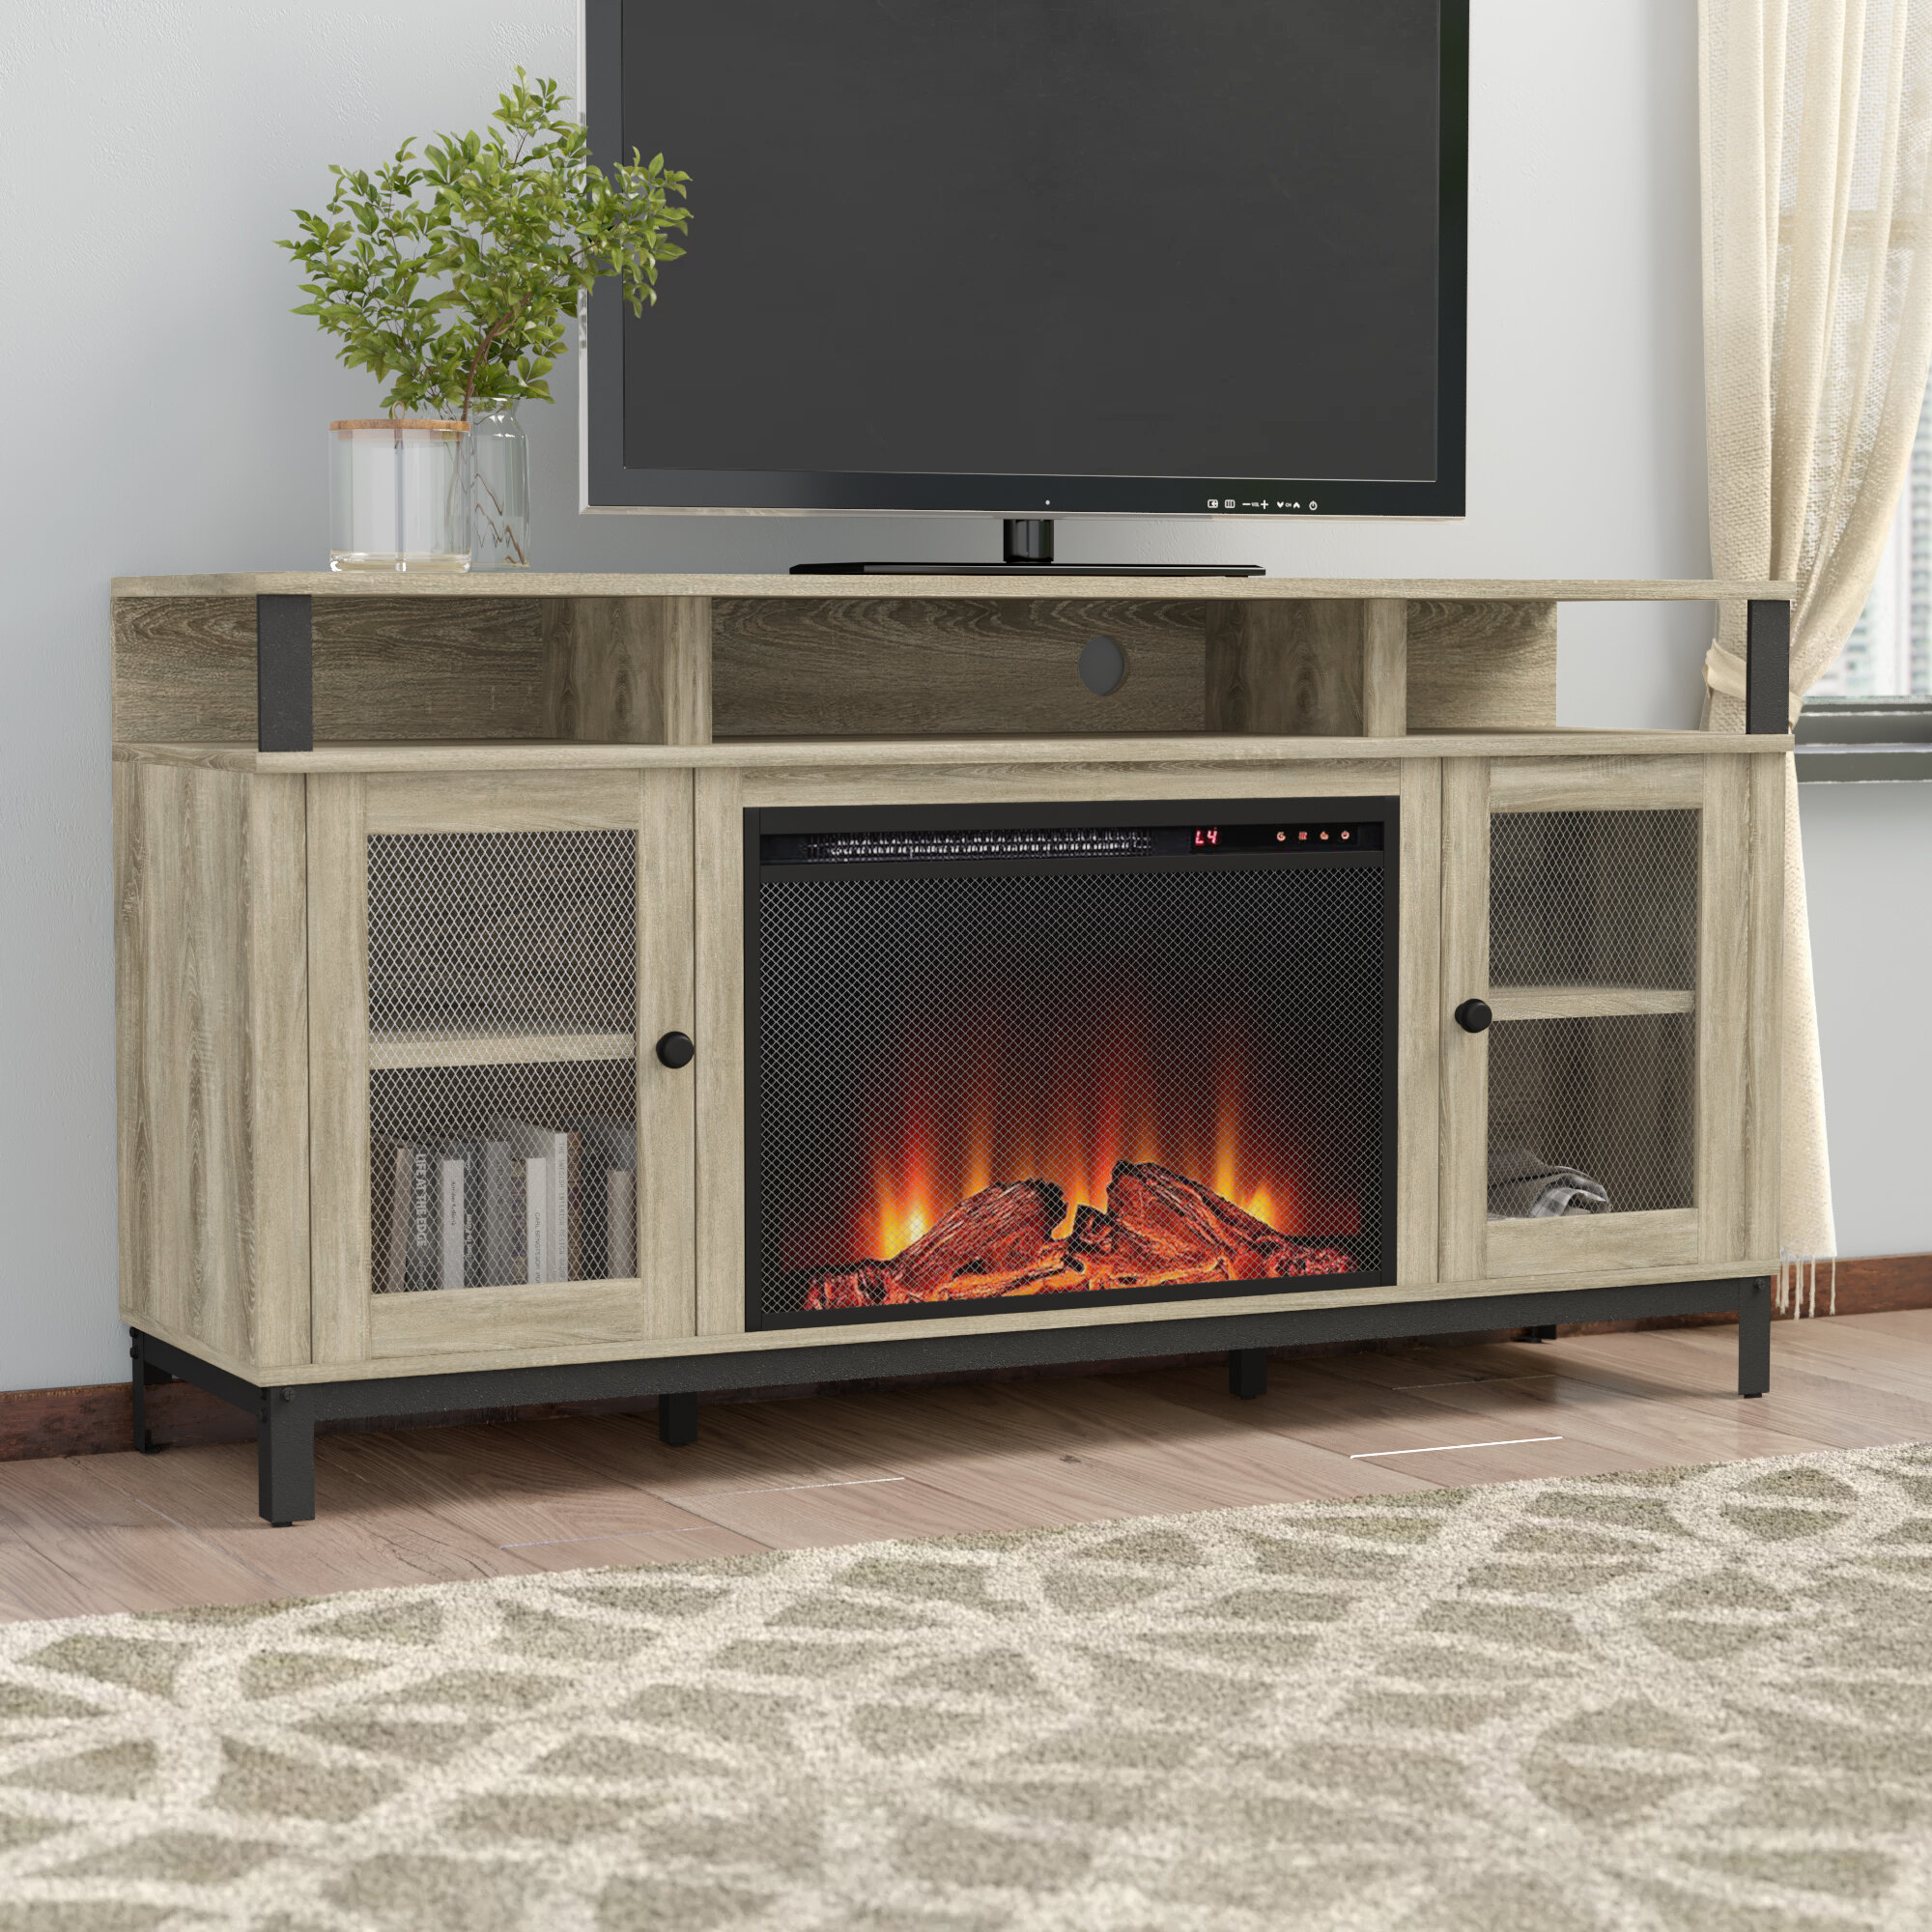 Fireplace Tv Stand Wayfair Awesome Fireplace Gracie Oaks Tv Stands You Ll Love In 2019